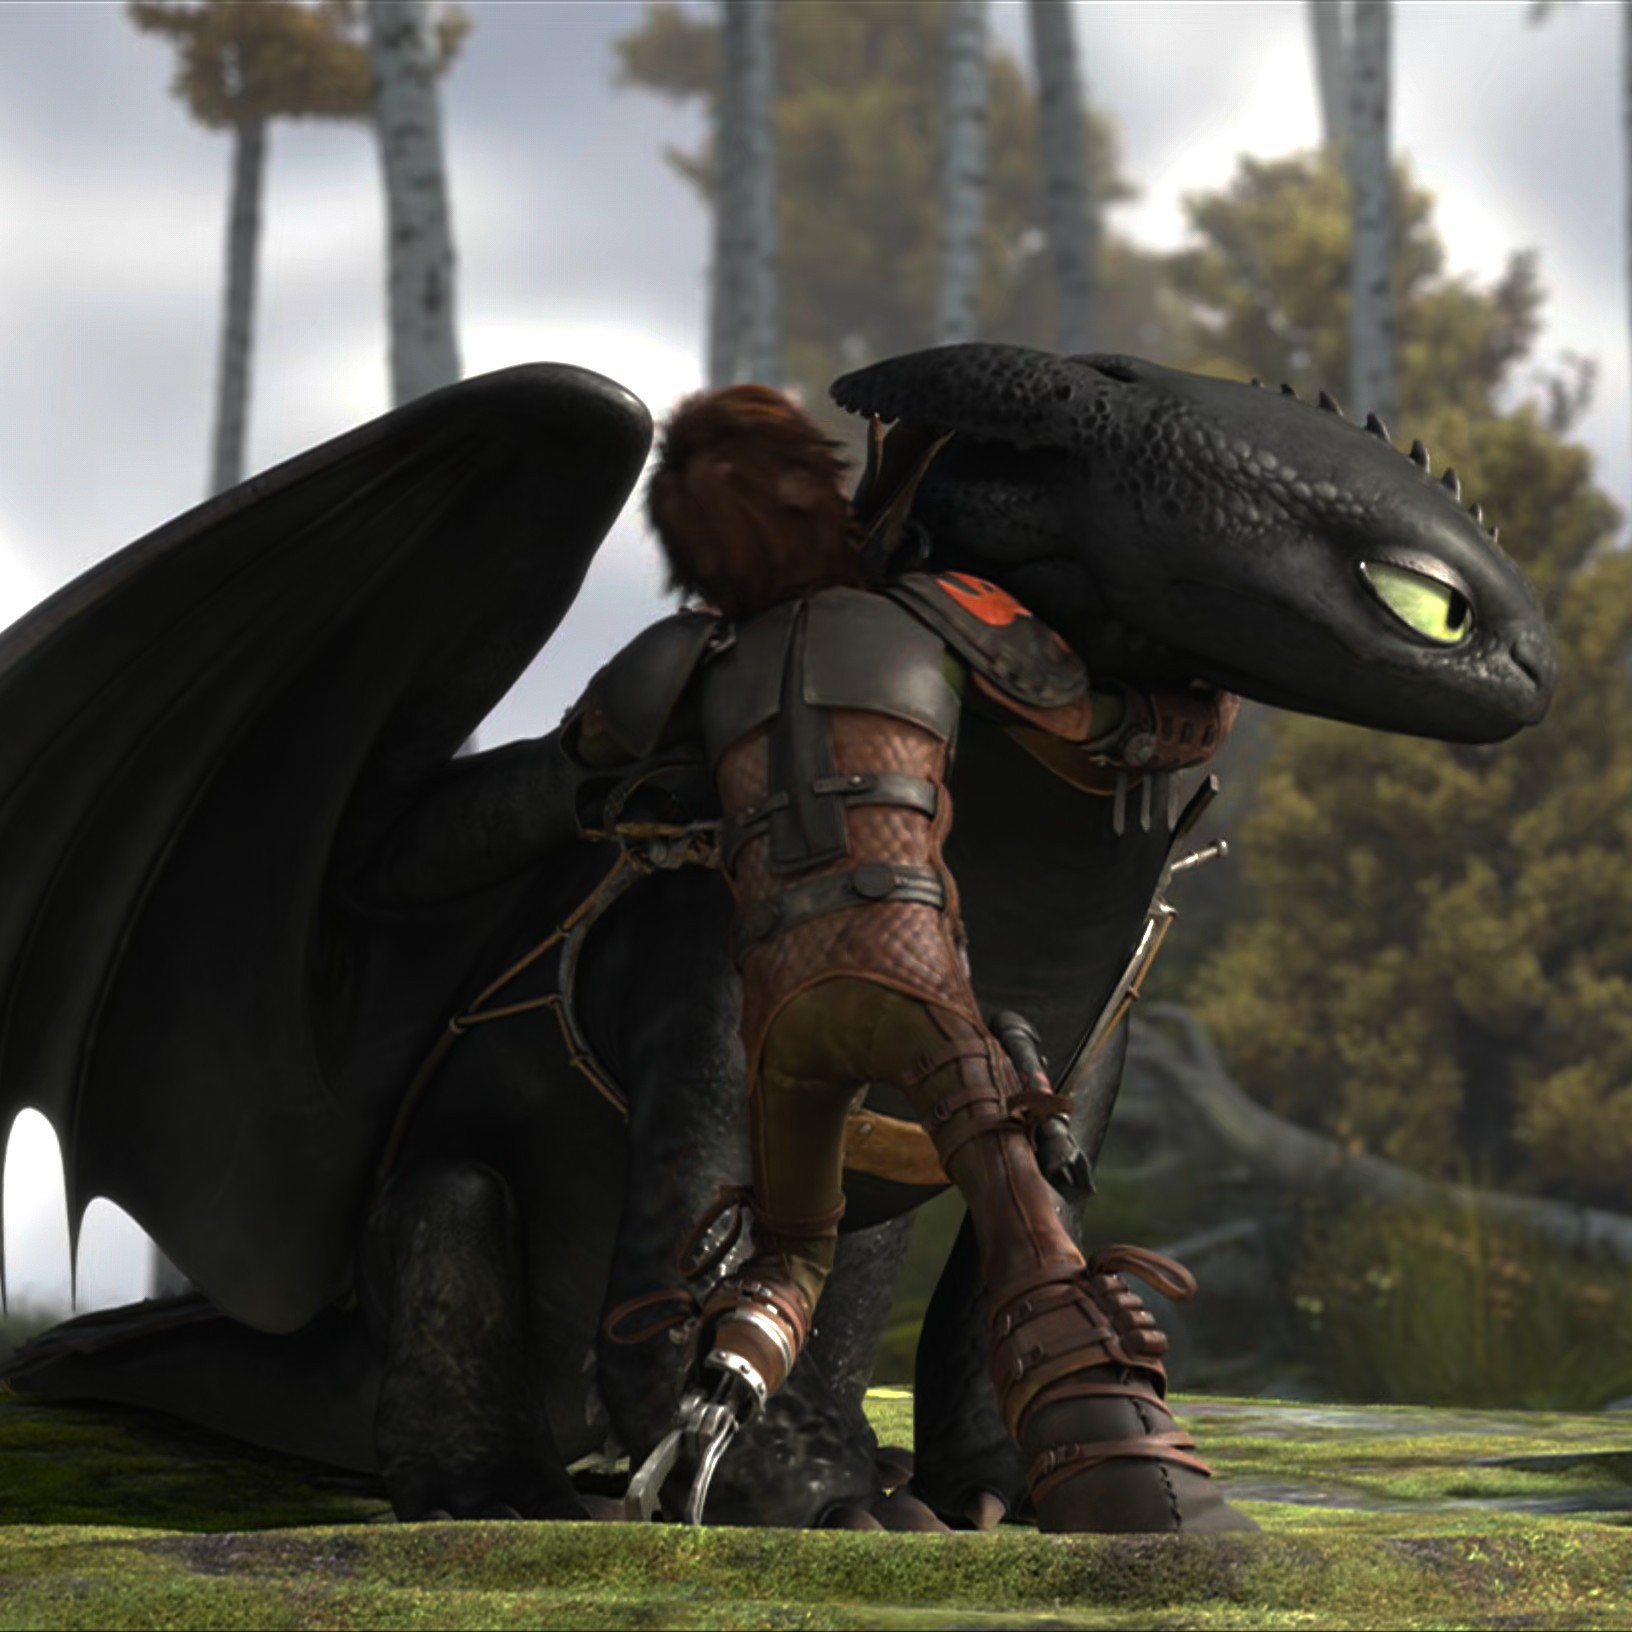 Toothless pic n°2